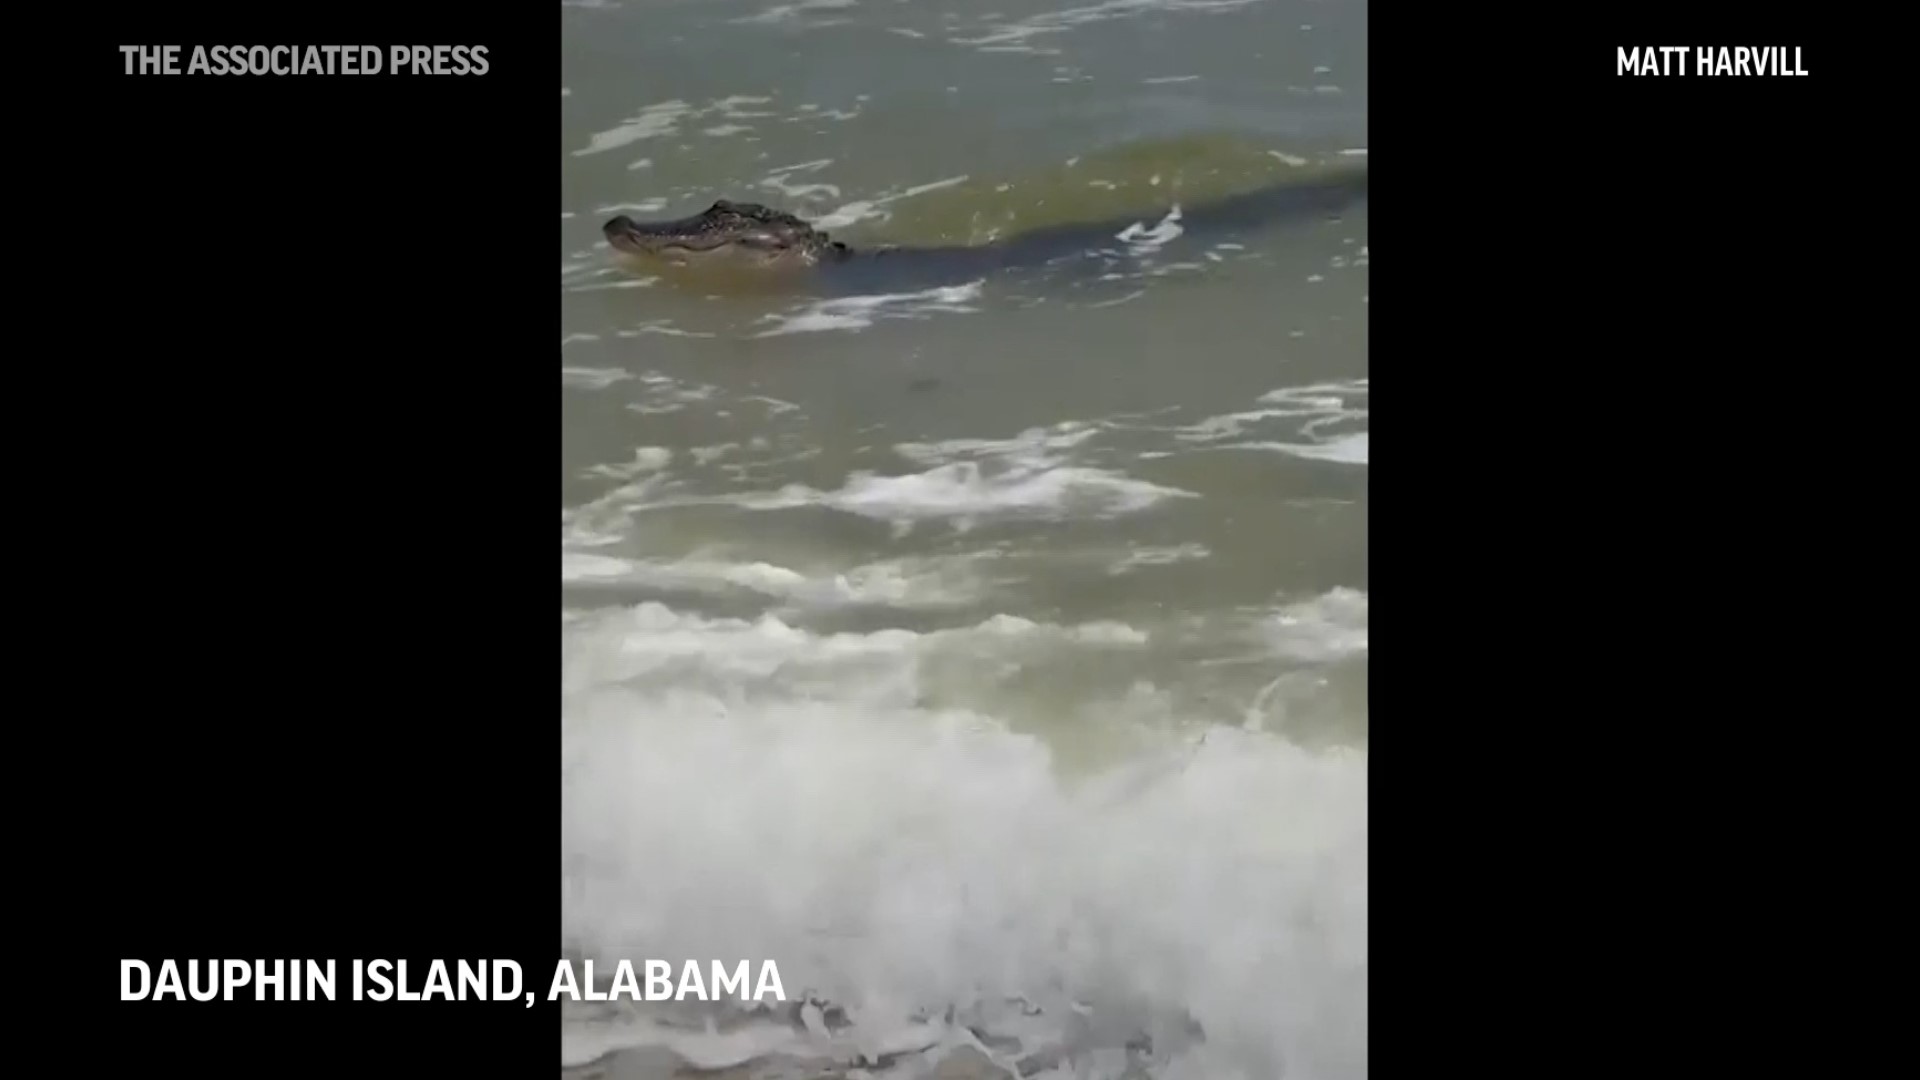 Matt Harvill, who was taking a trip to the beach with his girlfriend, spotted a lengthy gator bobbing in the waves.